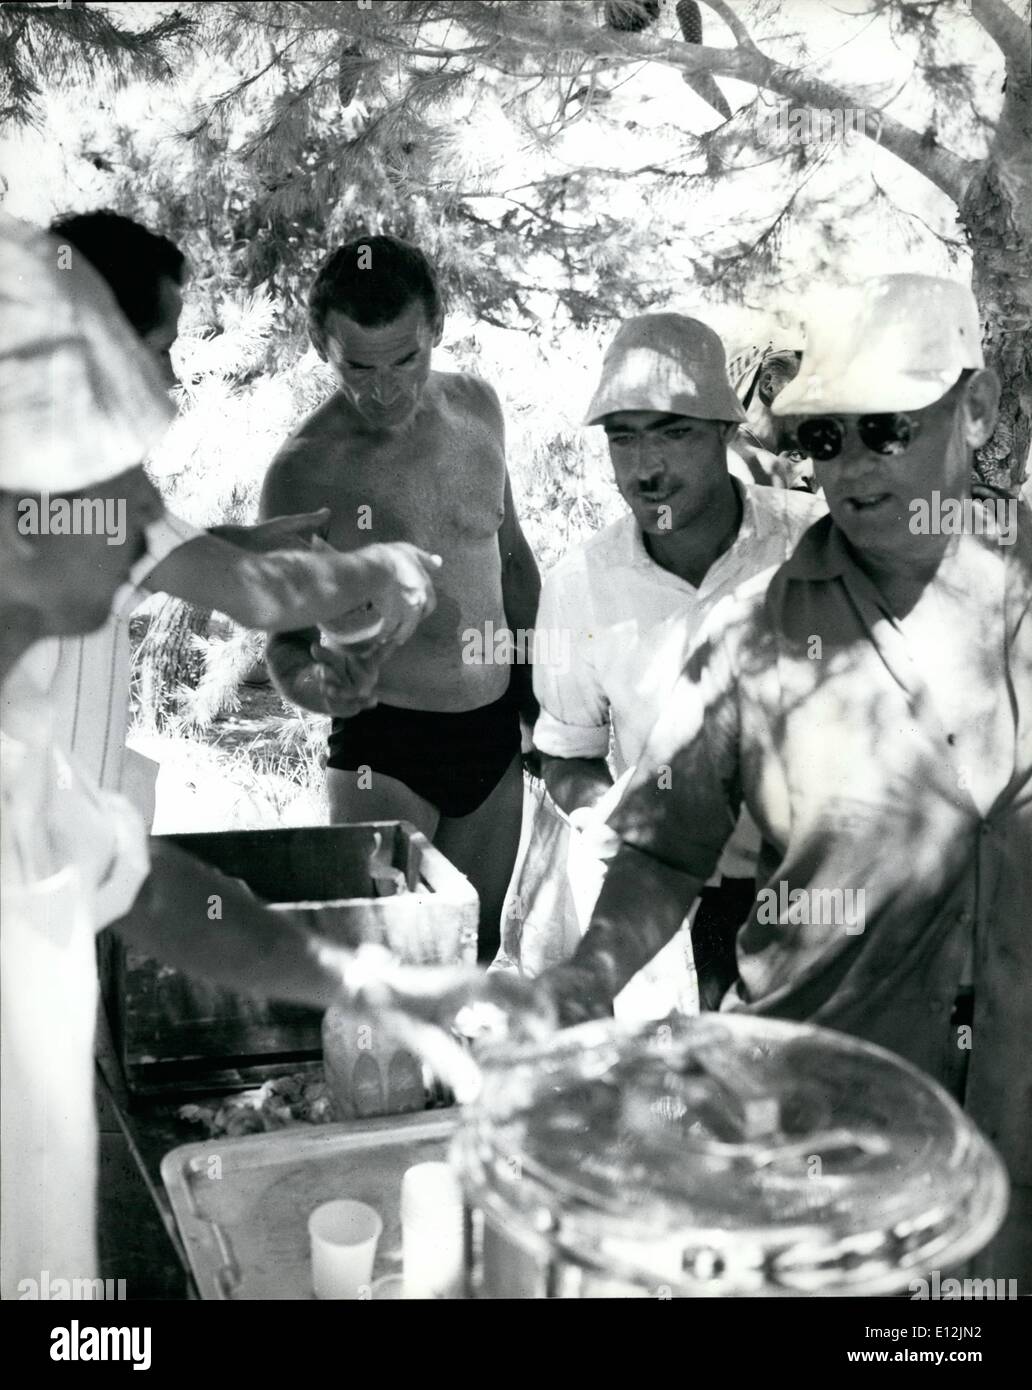 Feb. 24, 2012 - Lunch is served and star Jeff Chandler waits his turn like everyone else. the place is Eshtaol. Stock Photo